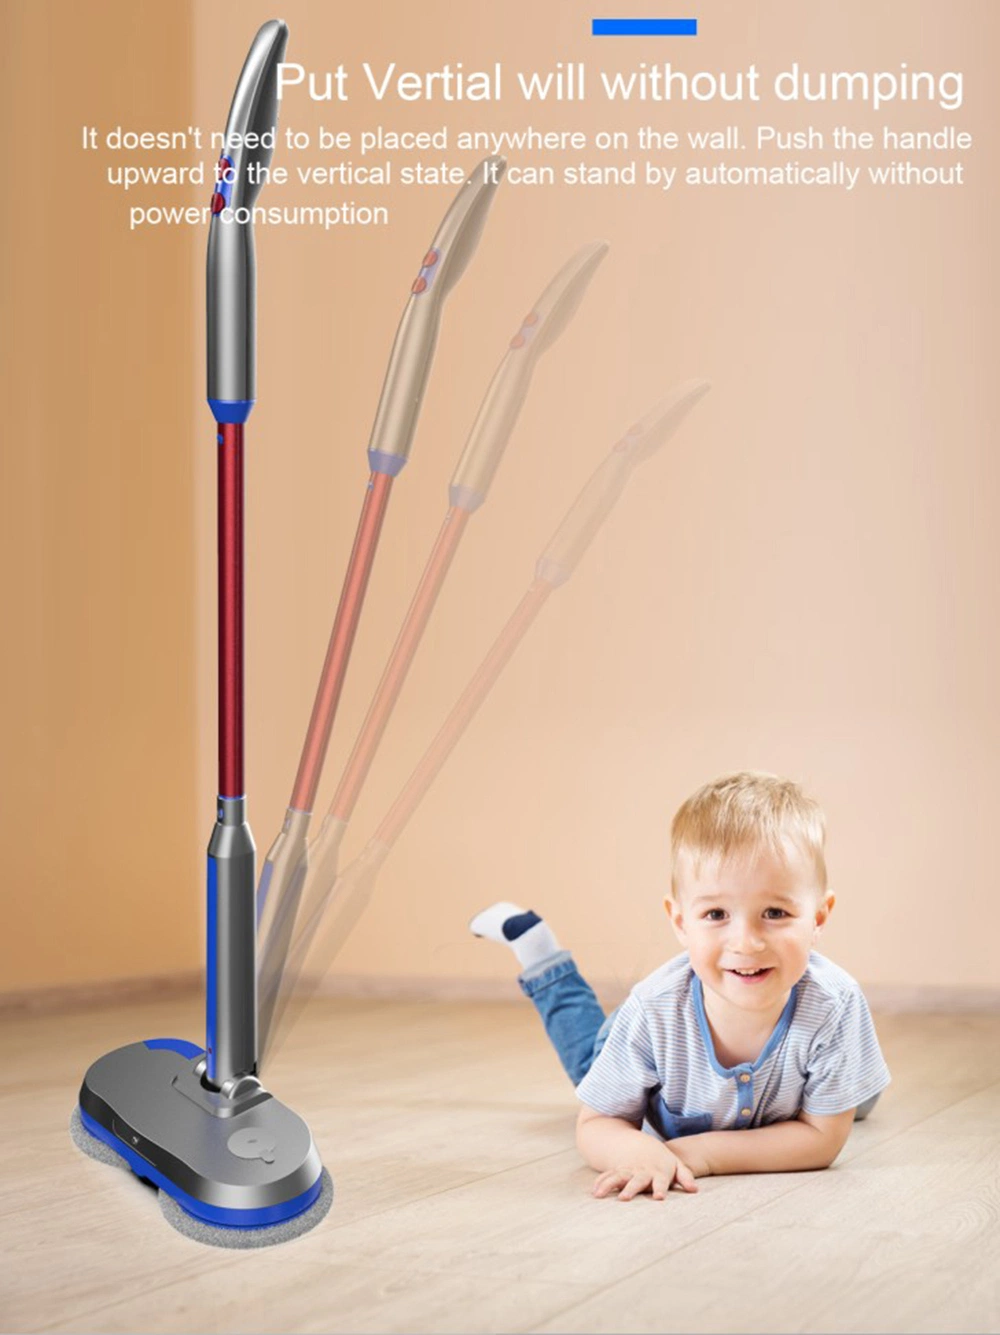 Cordless Electric Spin Mop, Spray Mop for Floor Cleaning with LED Headlight